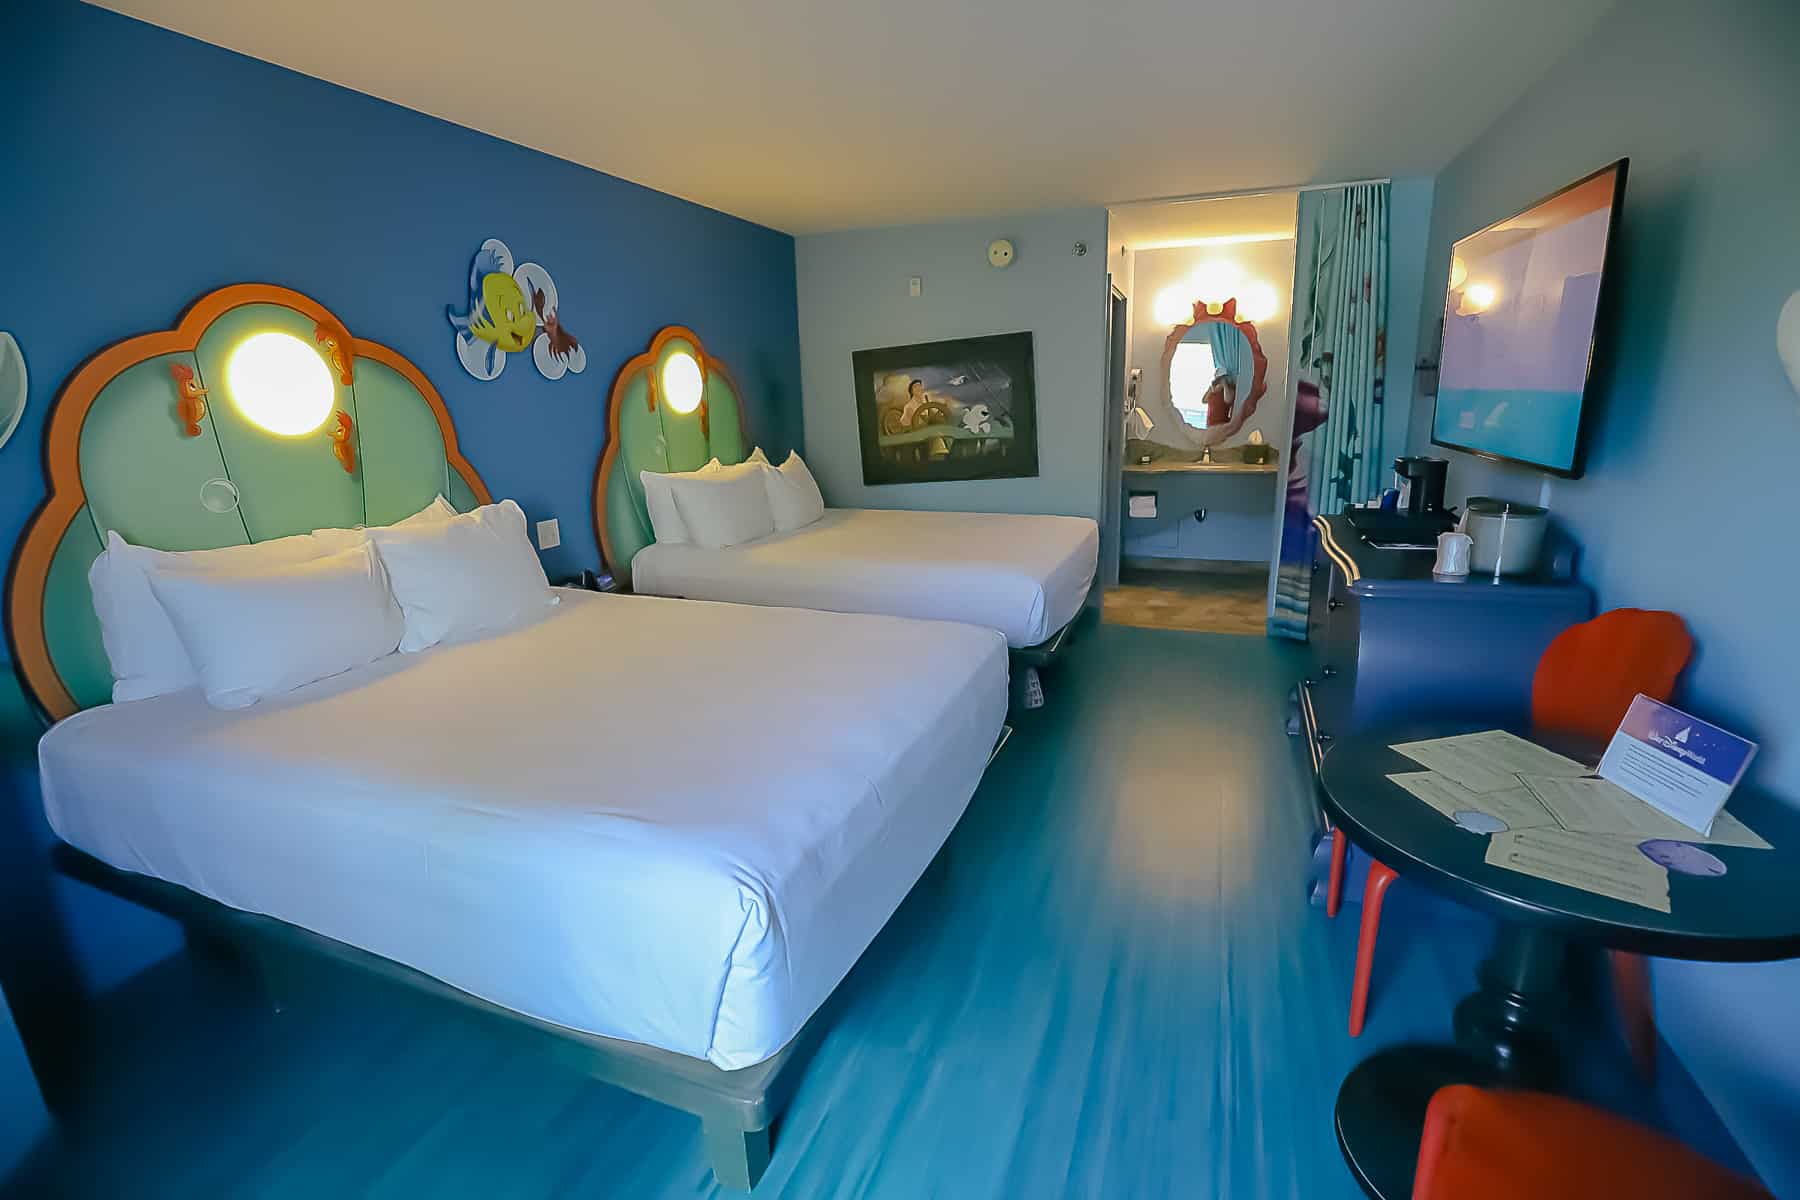 Photos and Thoughts on The Little Mermaid Rooms at Disney’s Art of Animation